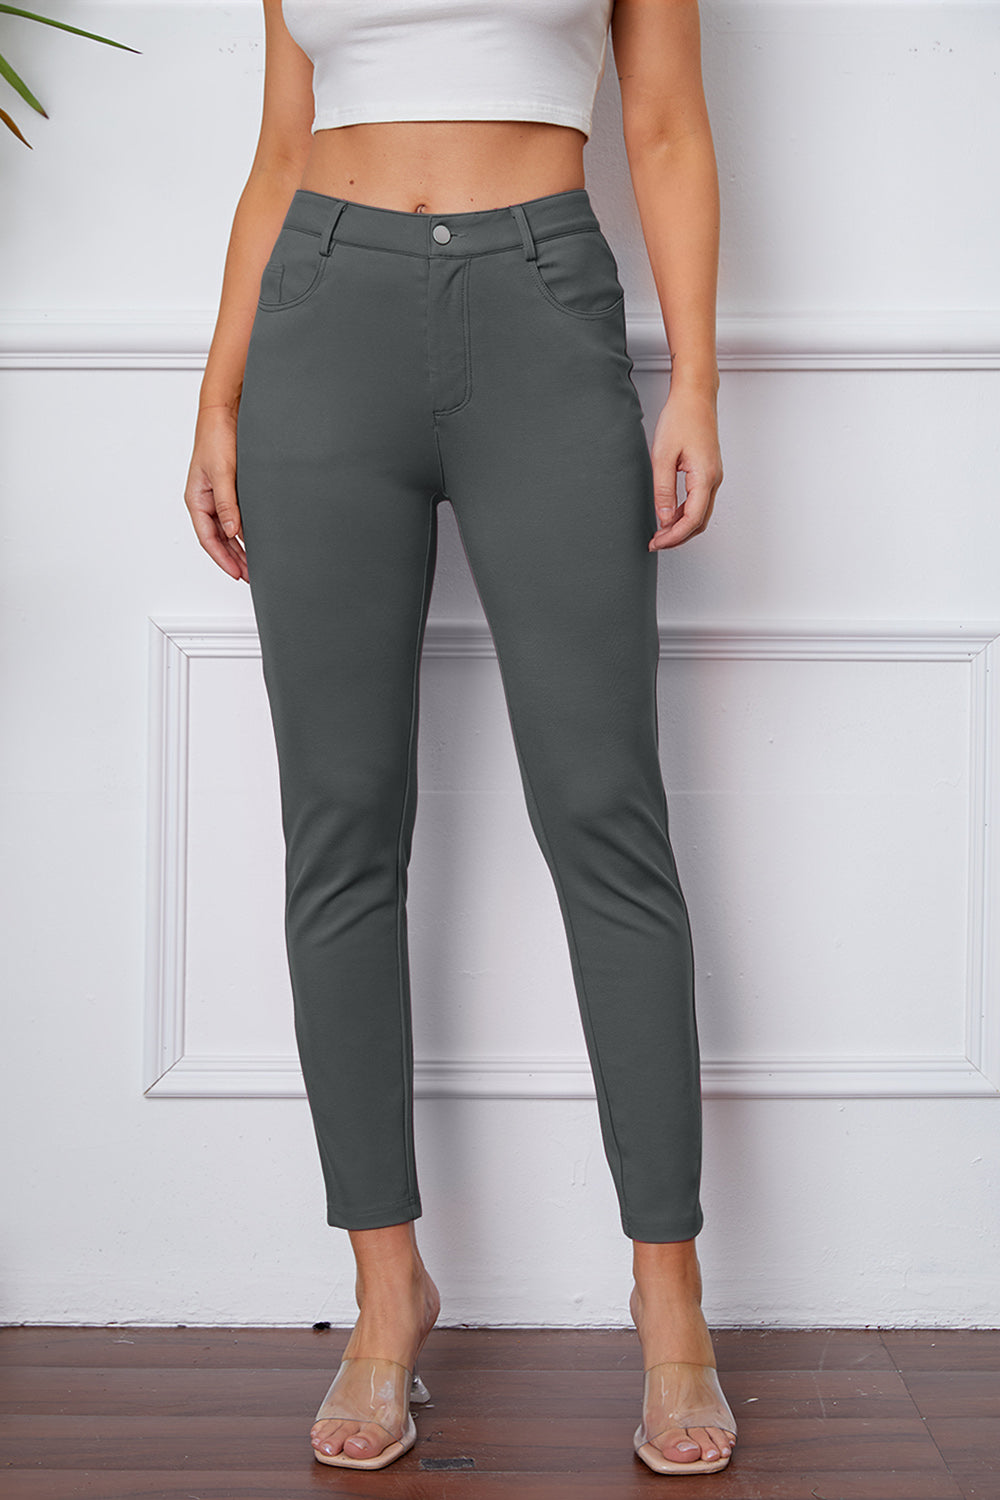 StretchyStitch Pants by Basic Bae - Dixie Hike & Style